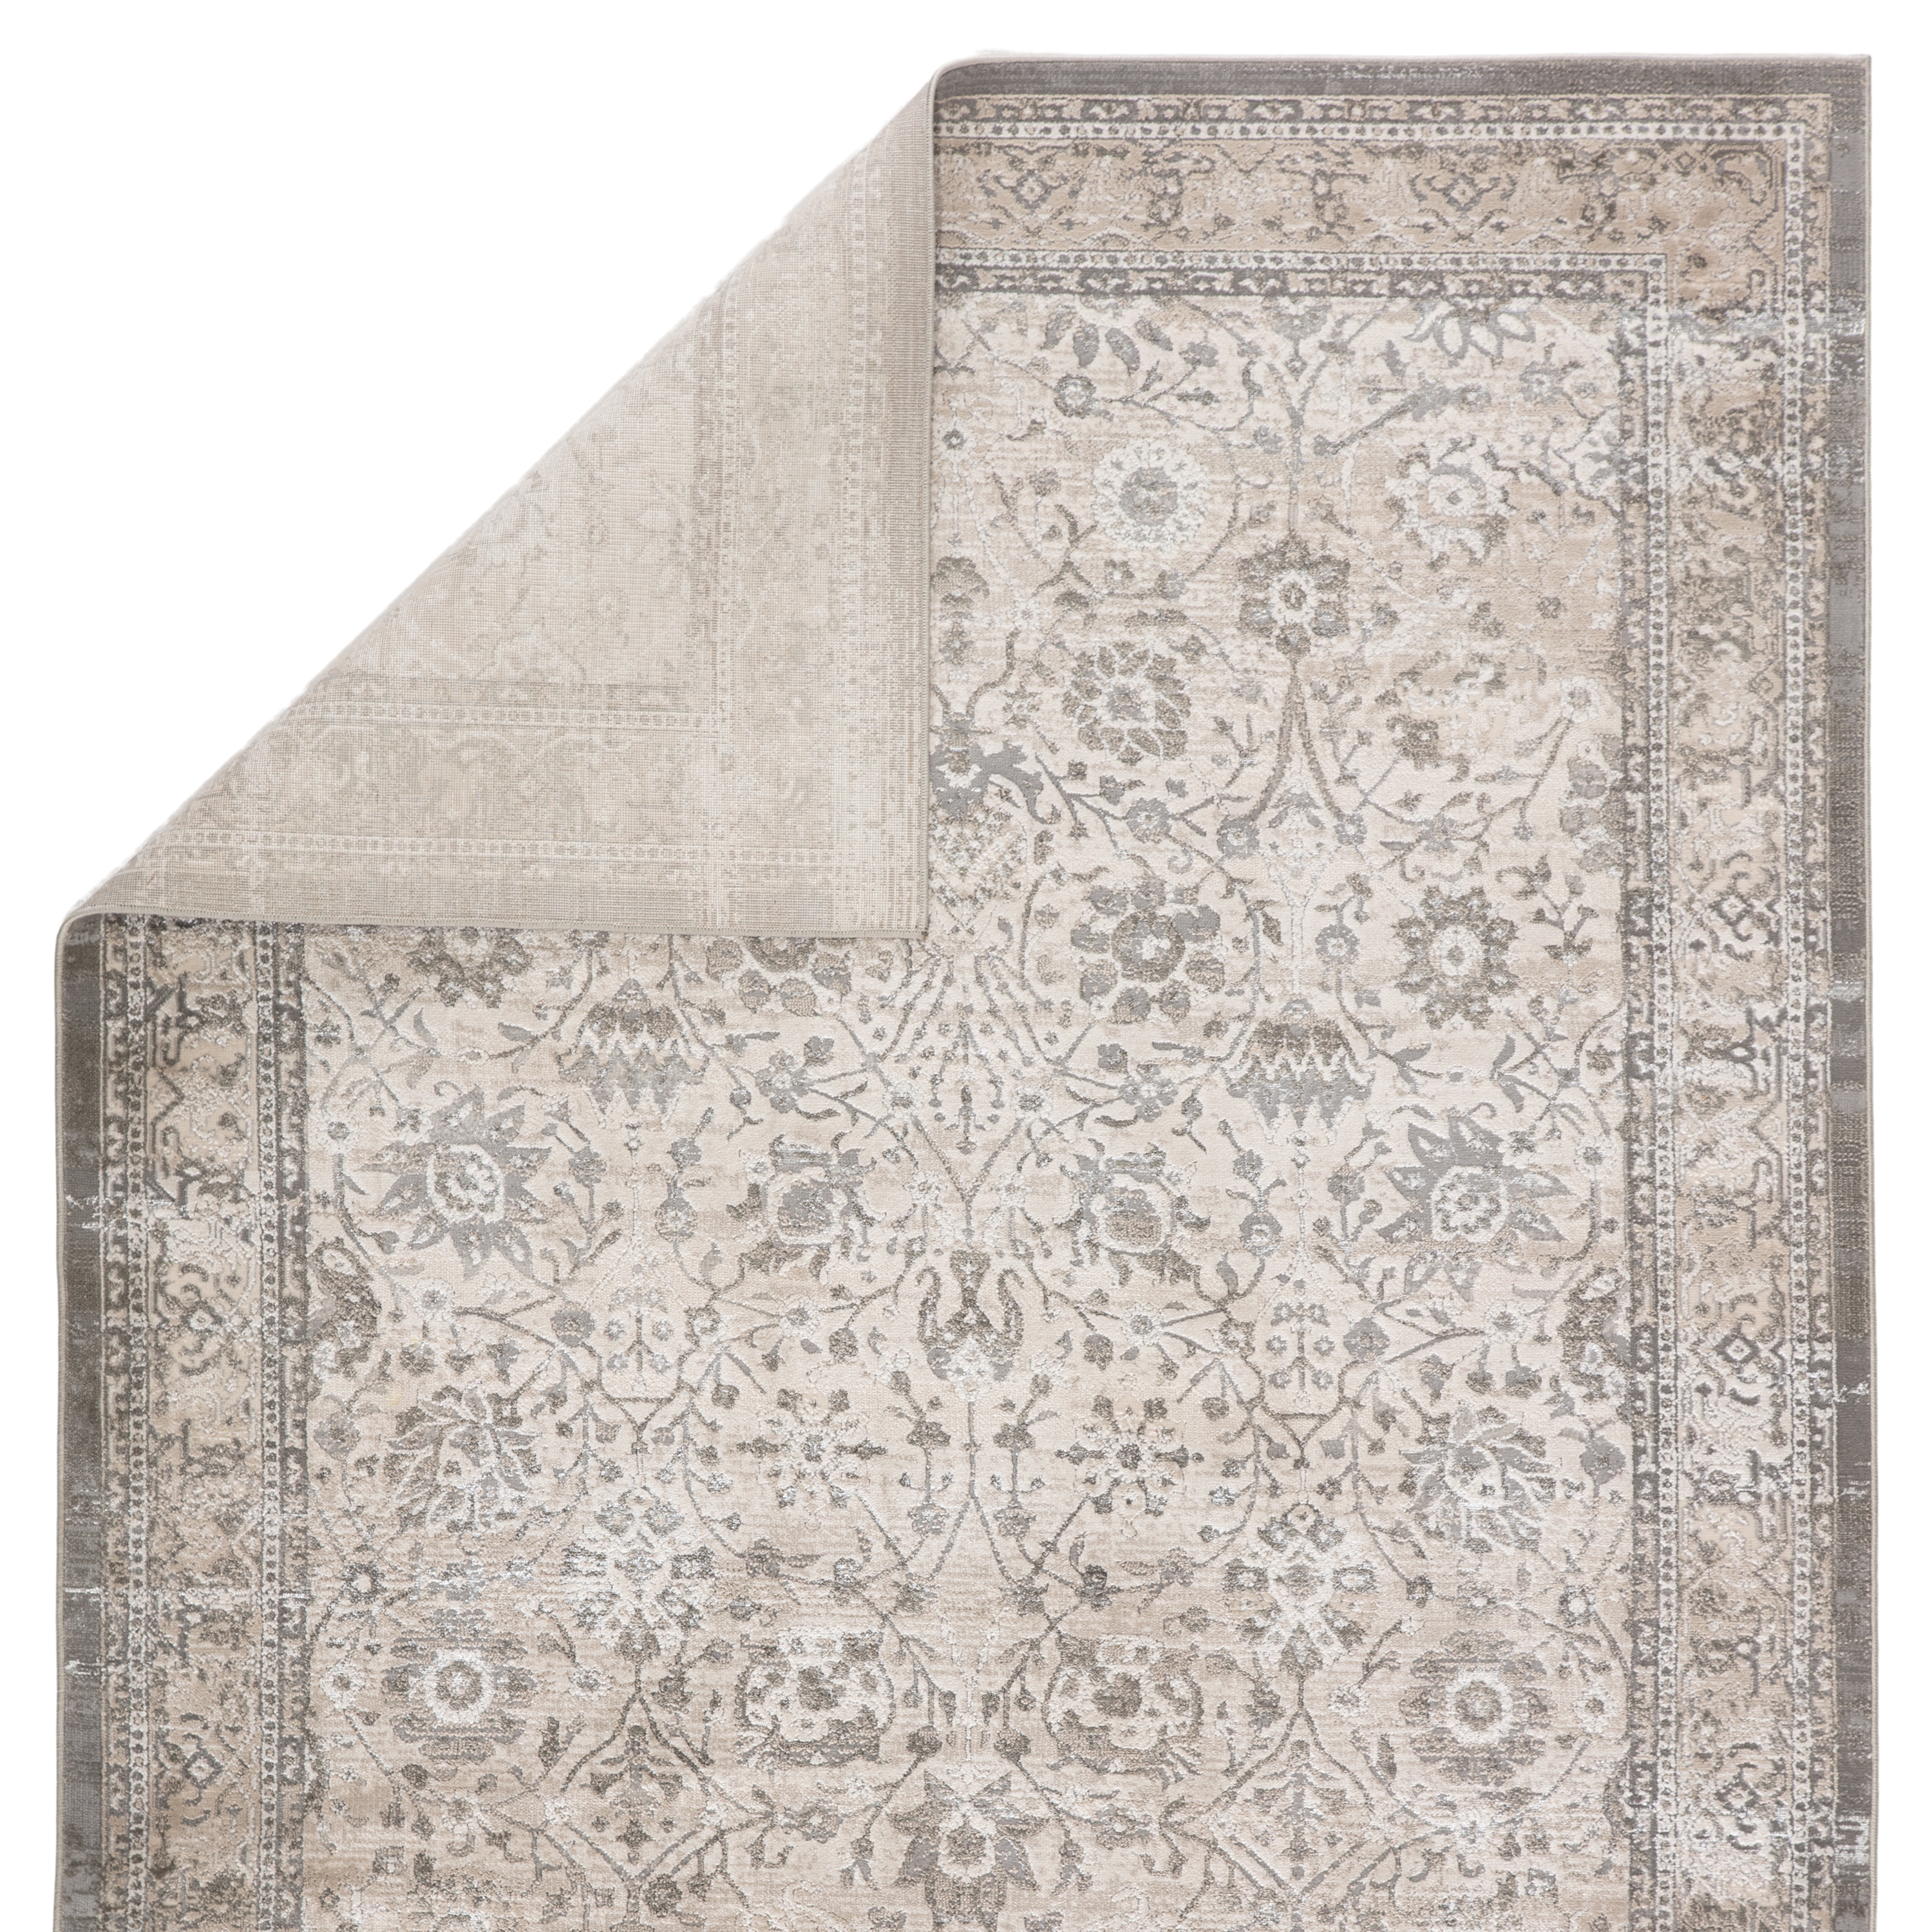 Vibe by Odel Oriental Gray/ White Area Rug (7'10"X10'6") - Image 2